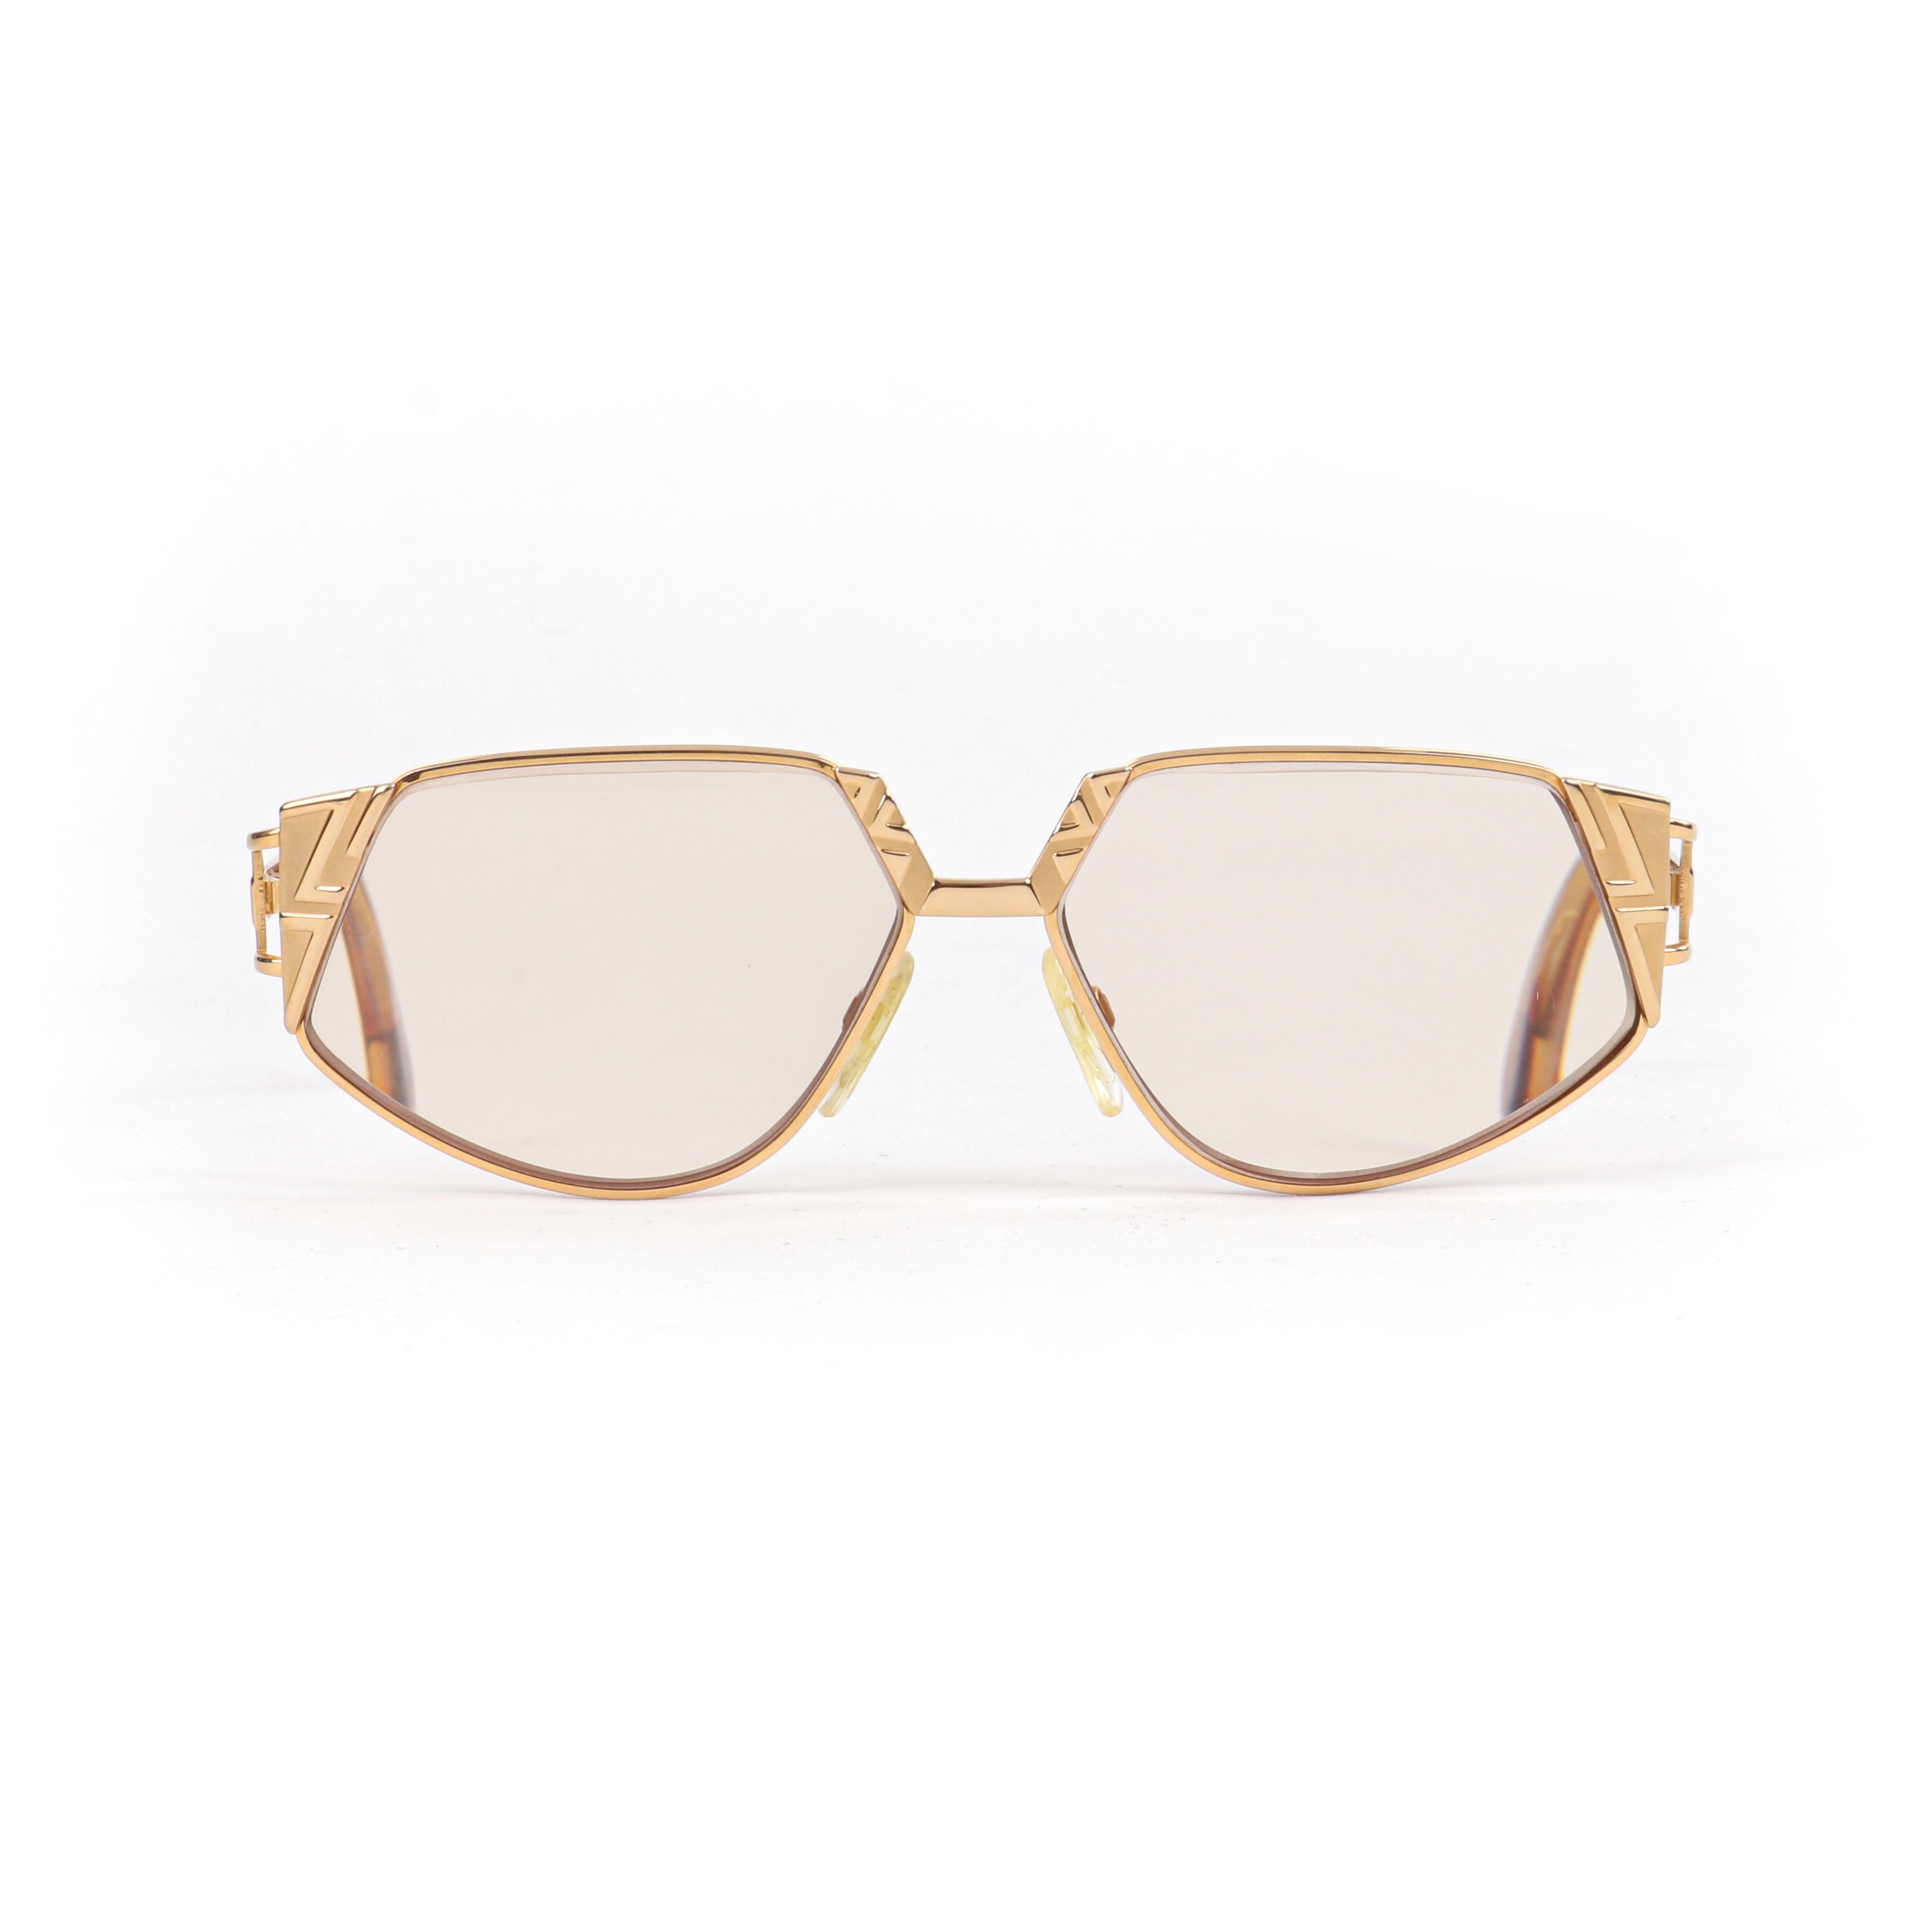 CAZAL c.1990’s Gold Tortoise Geometric MOD 238 Pentagonal Cat Eye Sunglasses 
 
Brand / Manufacturer: CAZAL
Circa: 1990’s
Style: Cat eye
Color(s): Shades of gold and brown
Lined: No
Unmarked Fabric Content (feel of): Glass lens, metal frame,